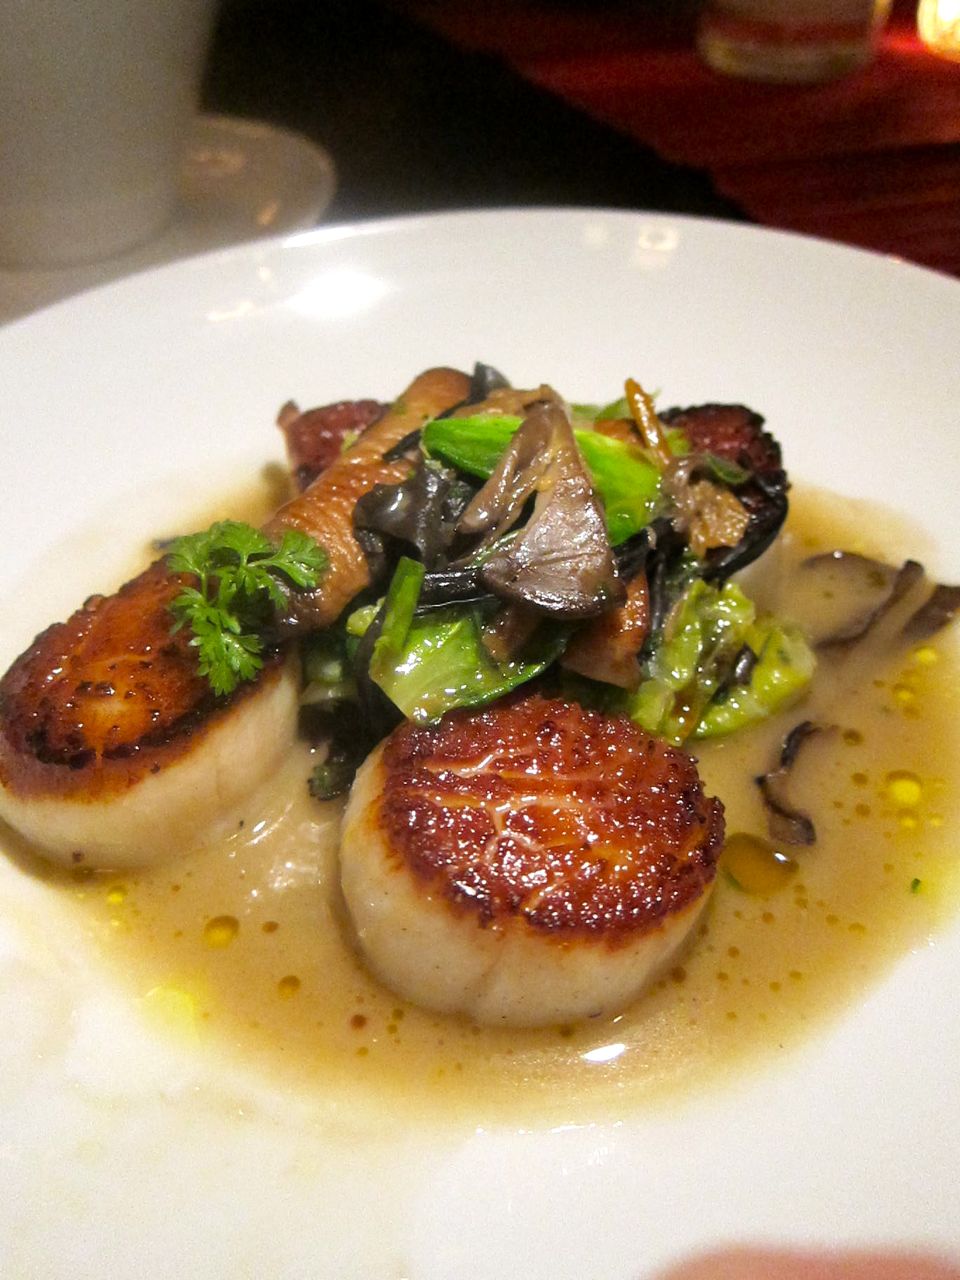 Caramelized scallops surround a toss of wild mushrooms, leeks and Brussels sprouts. Photo: Gael Greene